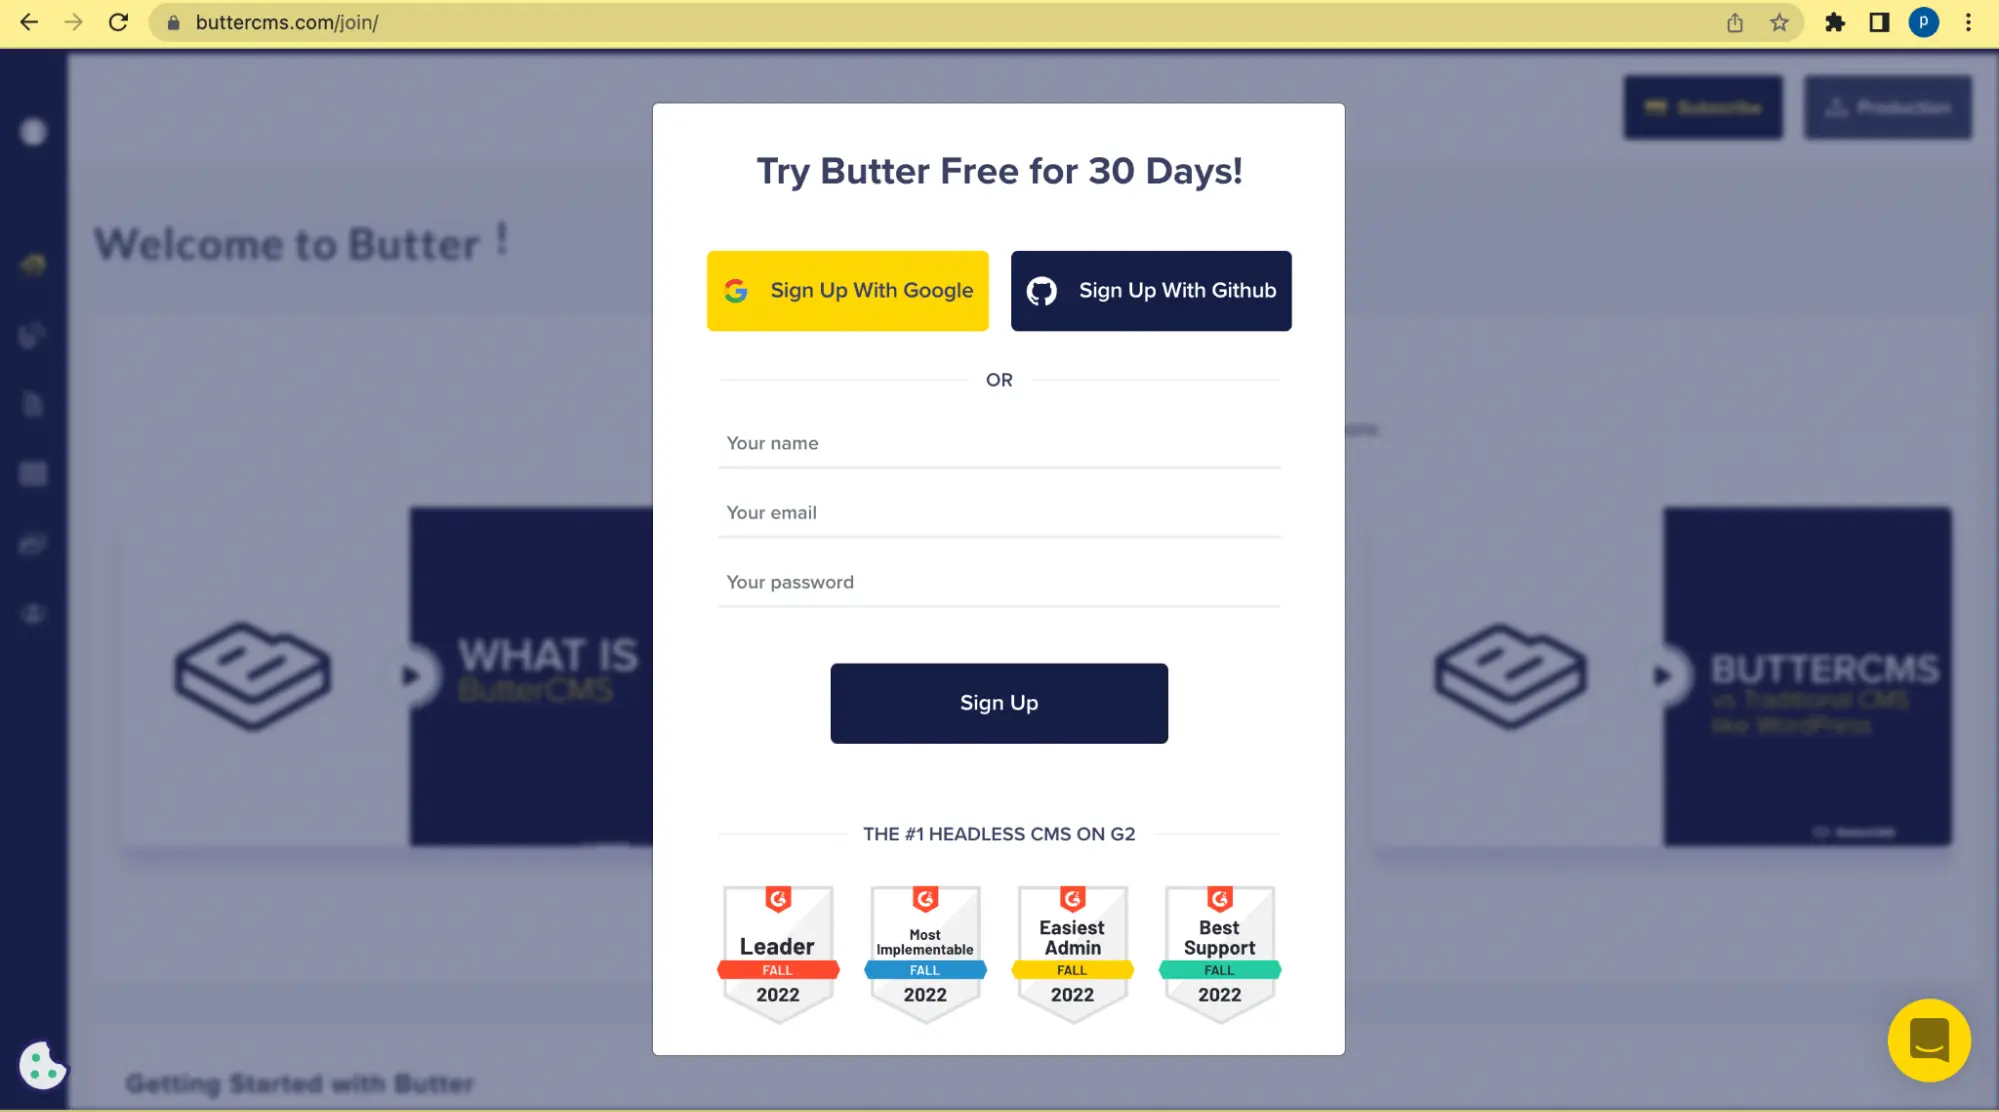 ButterCMS sign up page/ pop-up